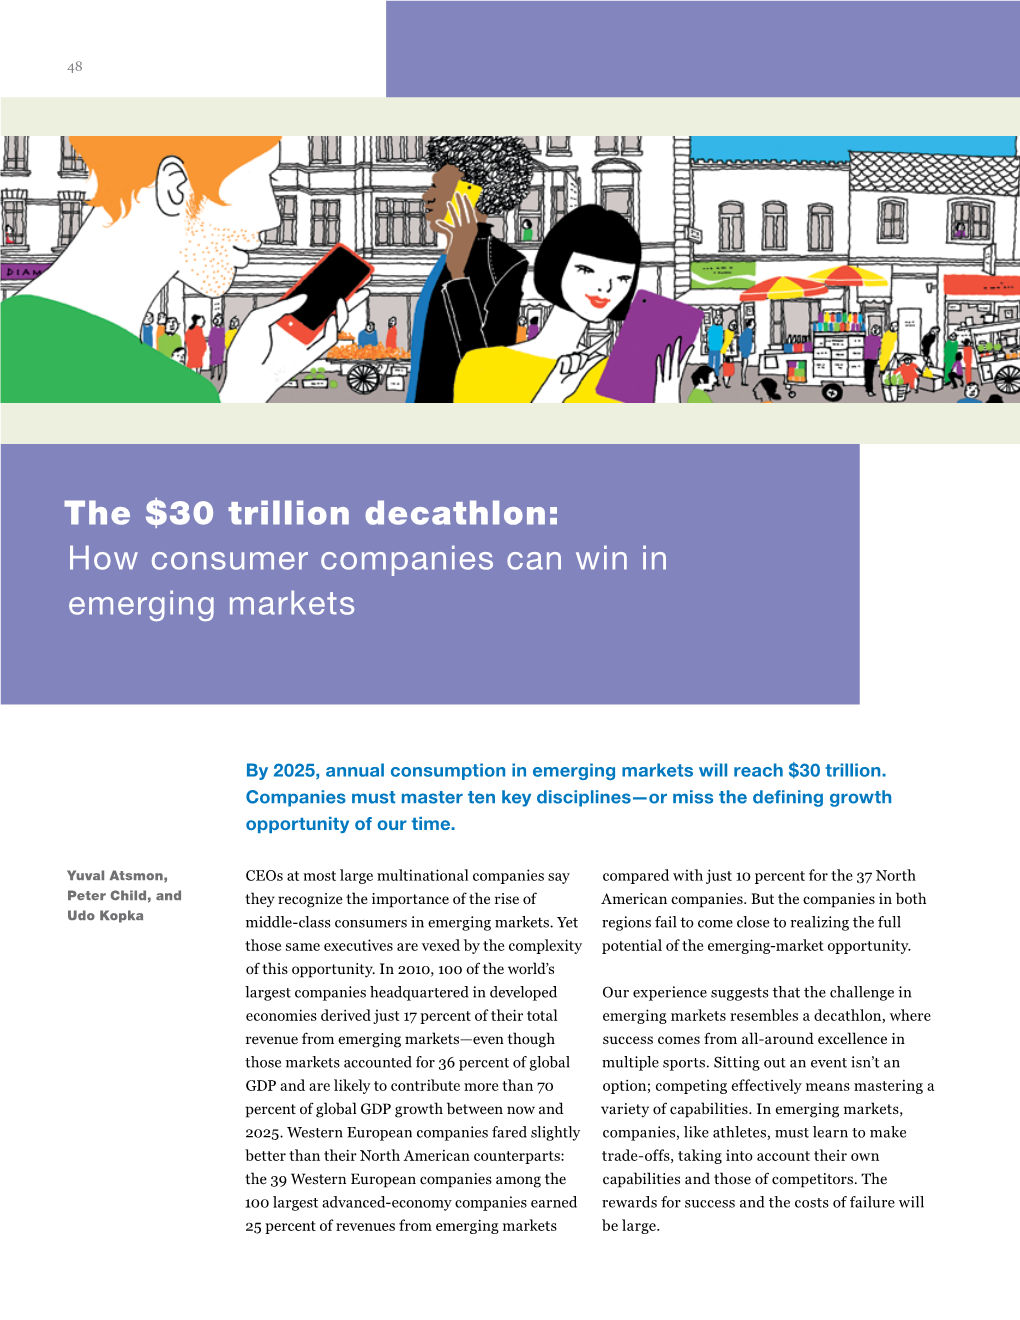 The $30 Trillion Decathlon: How Consumer Companies Can Win in Emerging Markets